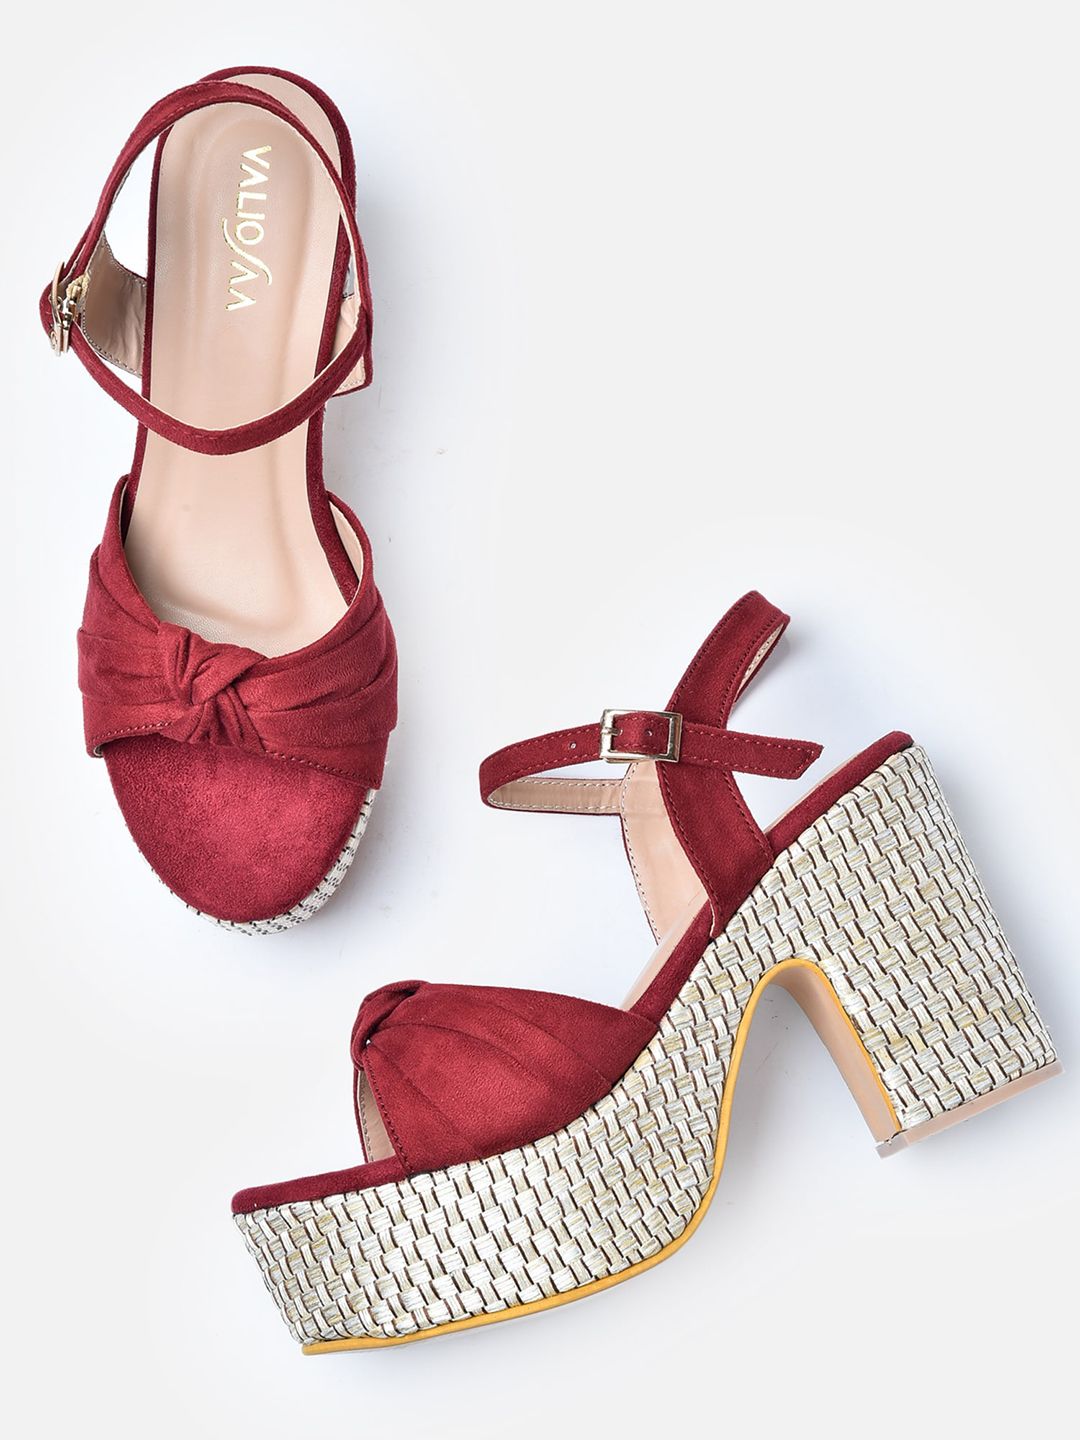 VALIOSAA Maroon Suede Platform Sandals with Bows Price in India